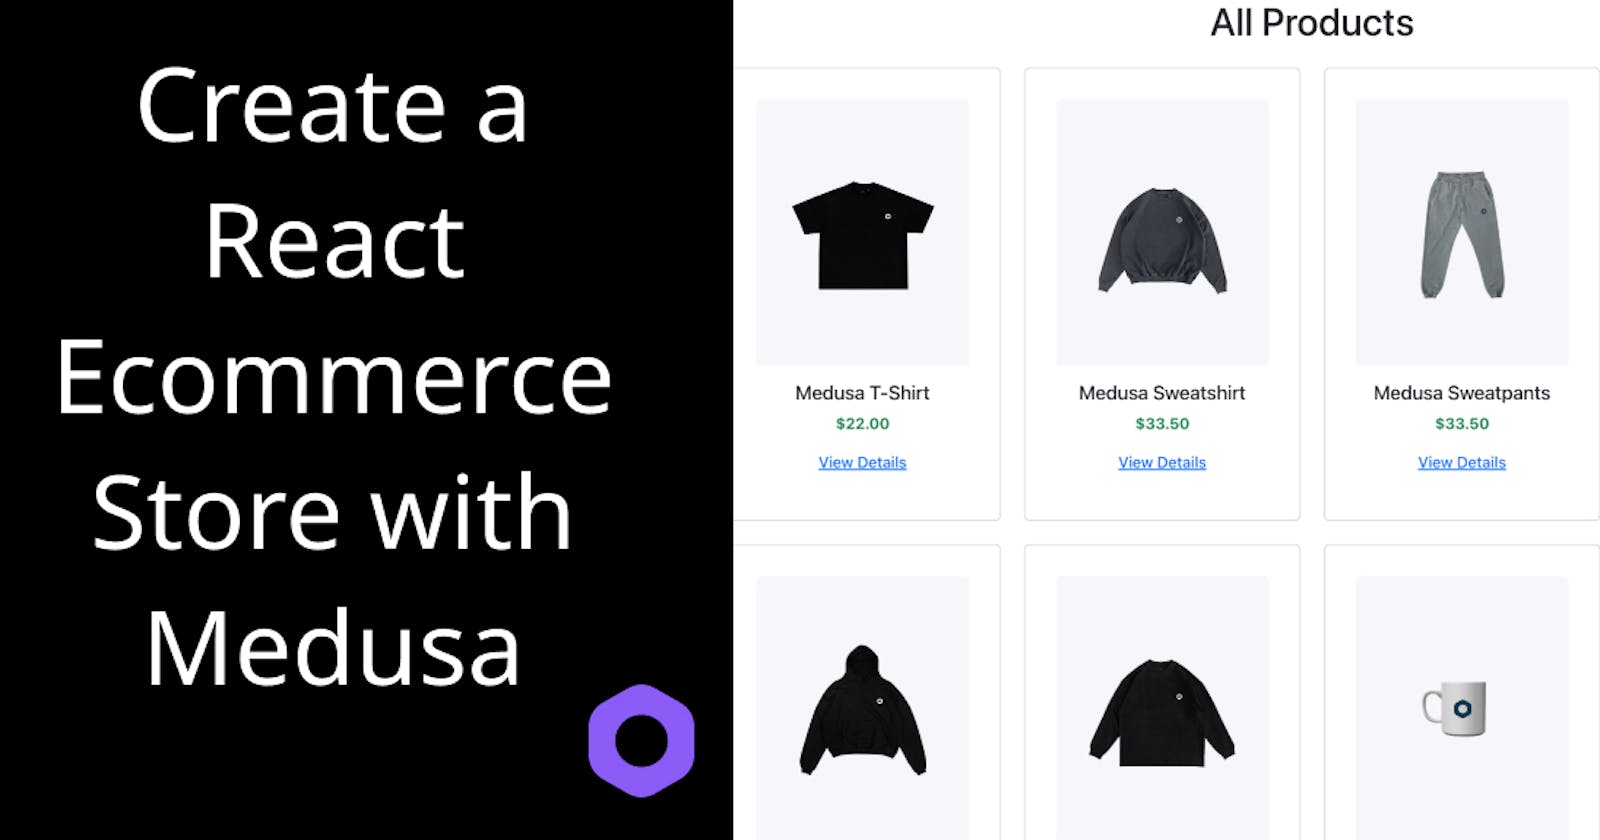 Create a React Ecommerce Store with Medusa